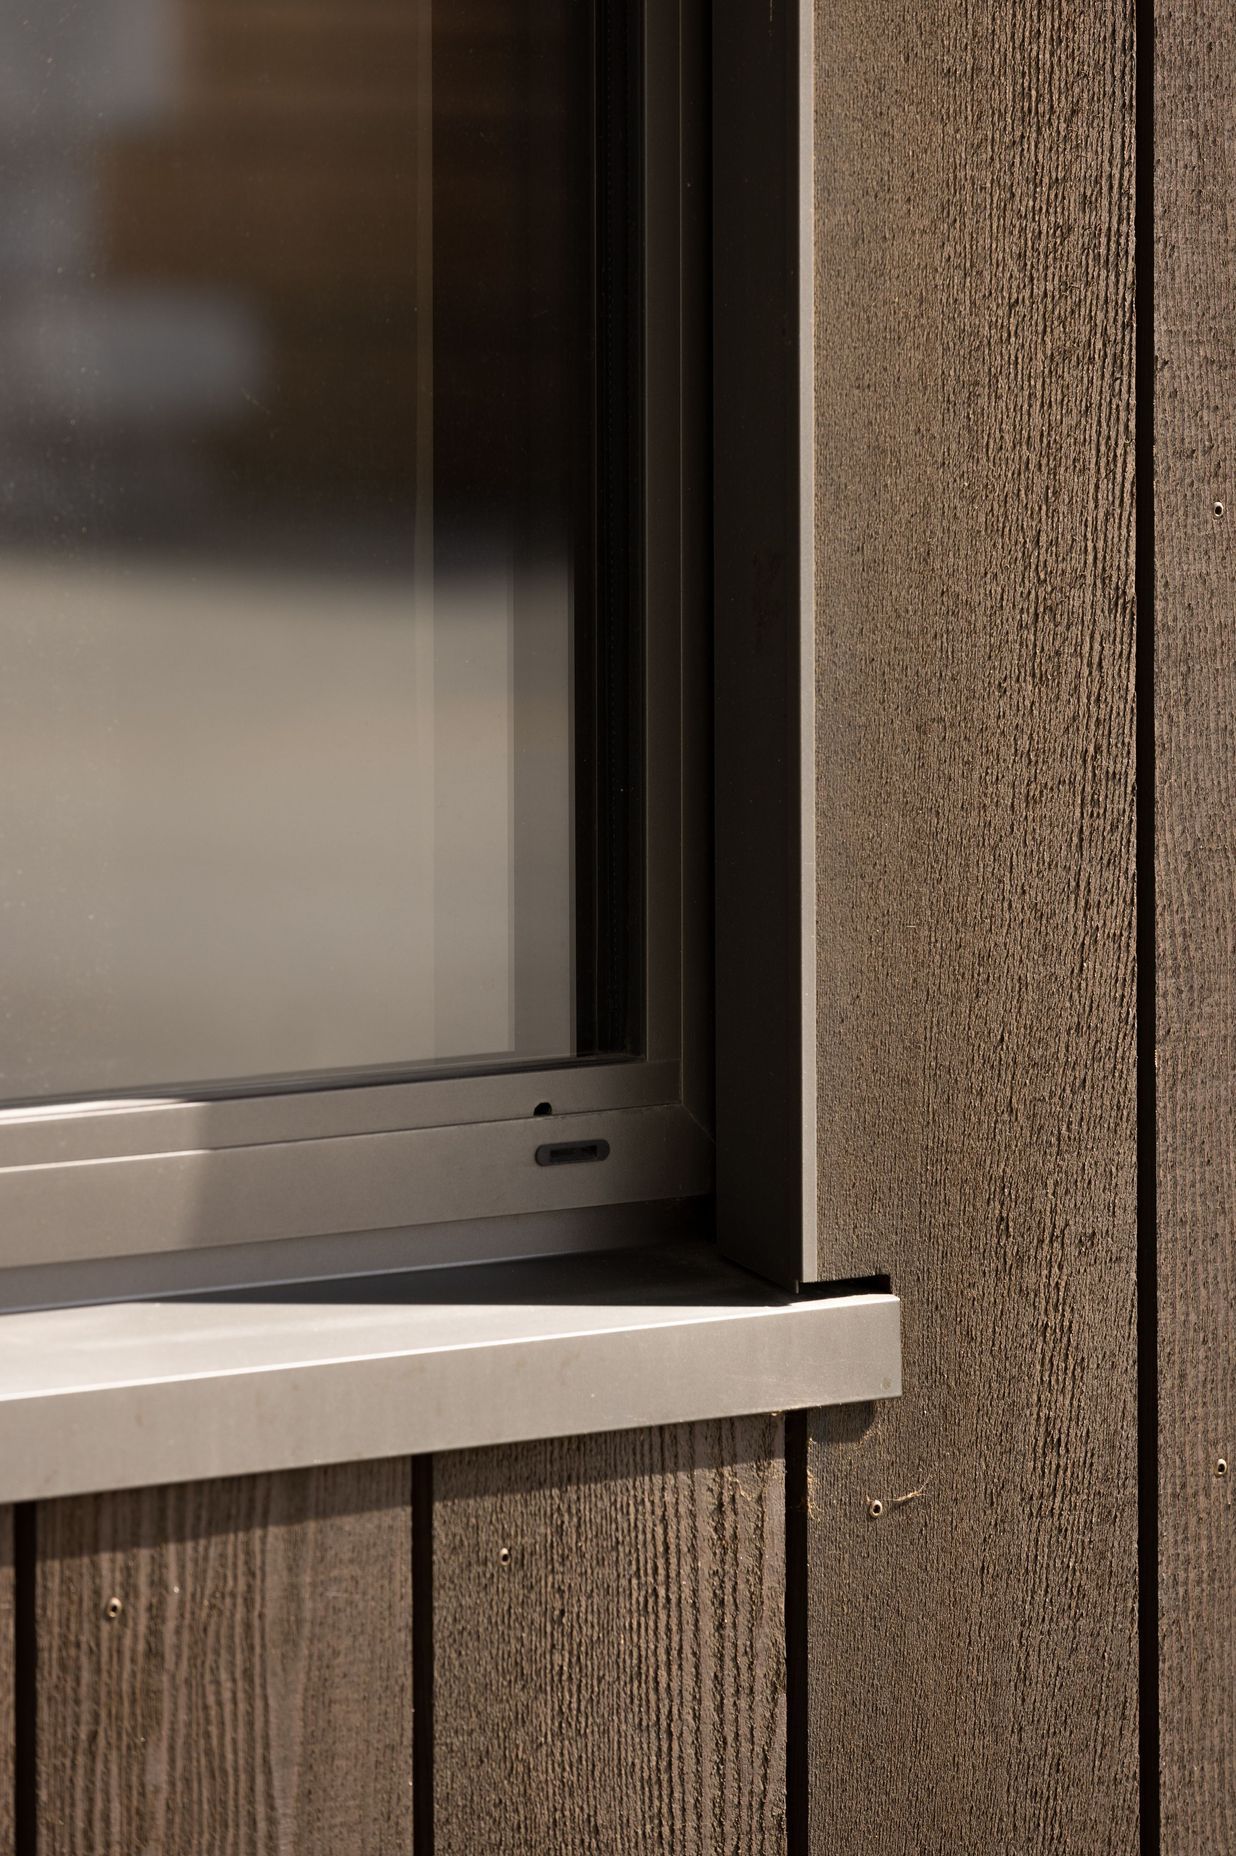 Recessed windows: combining high performance with Northern European aesthetics